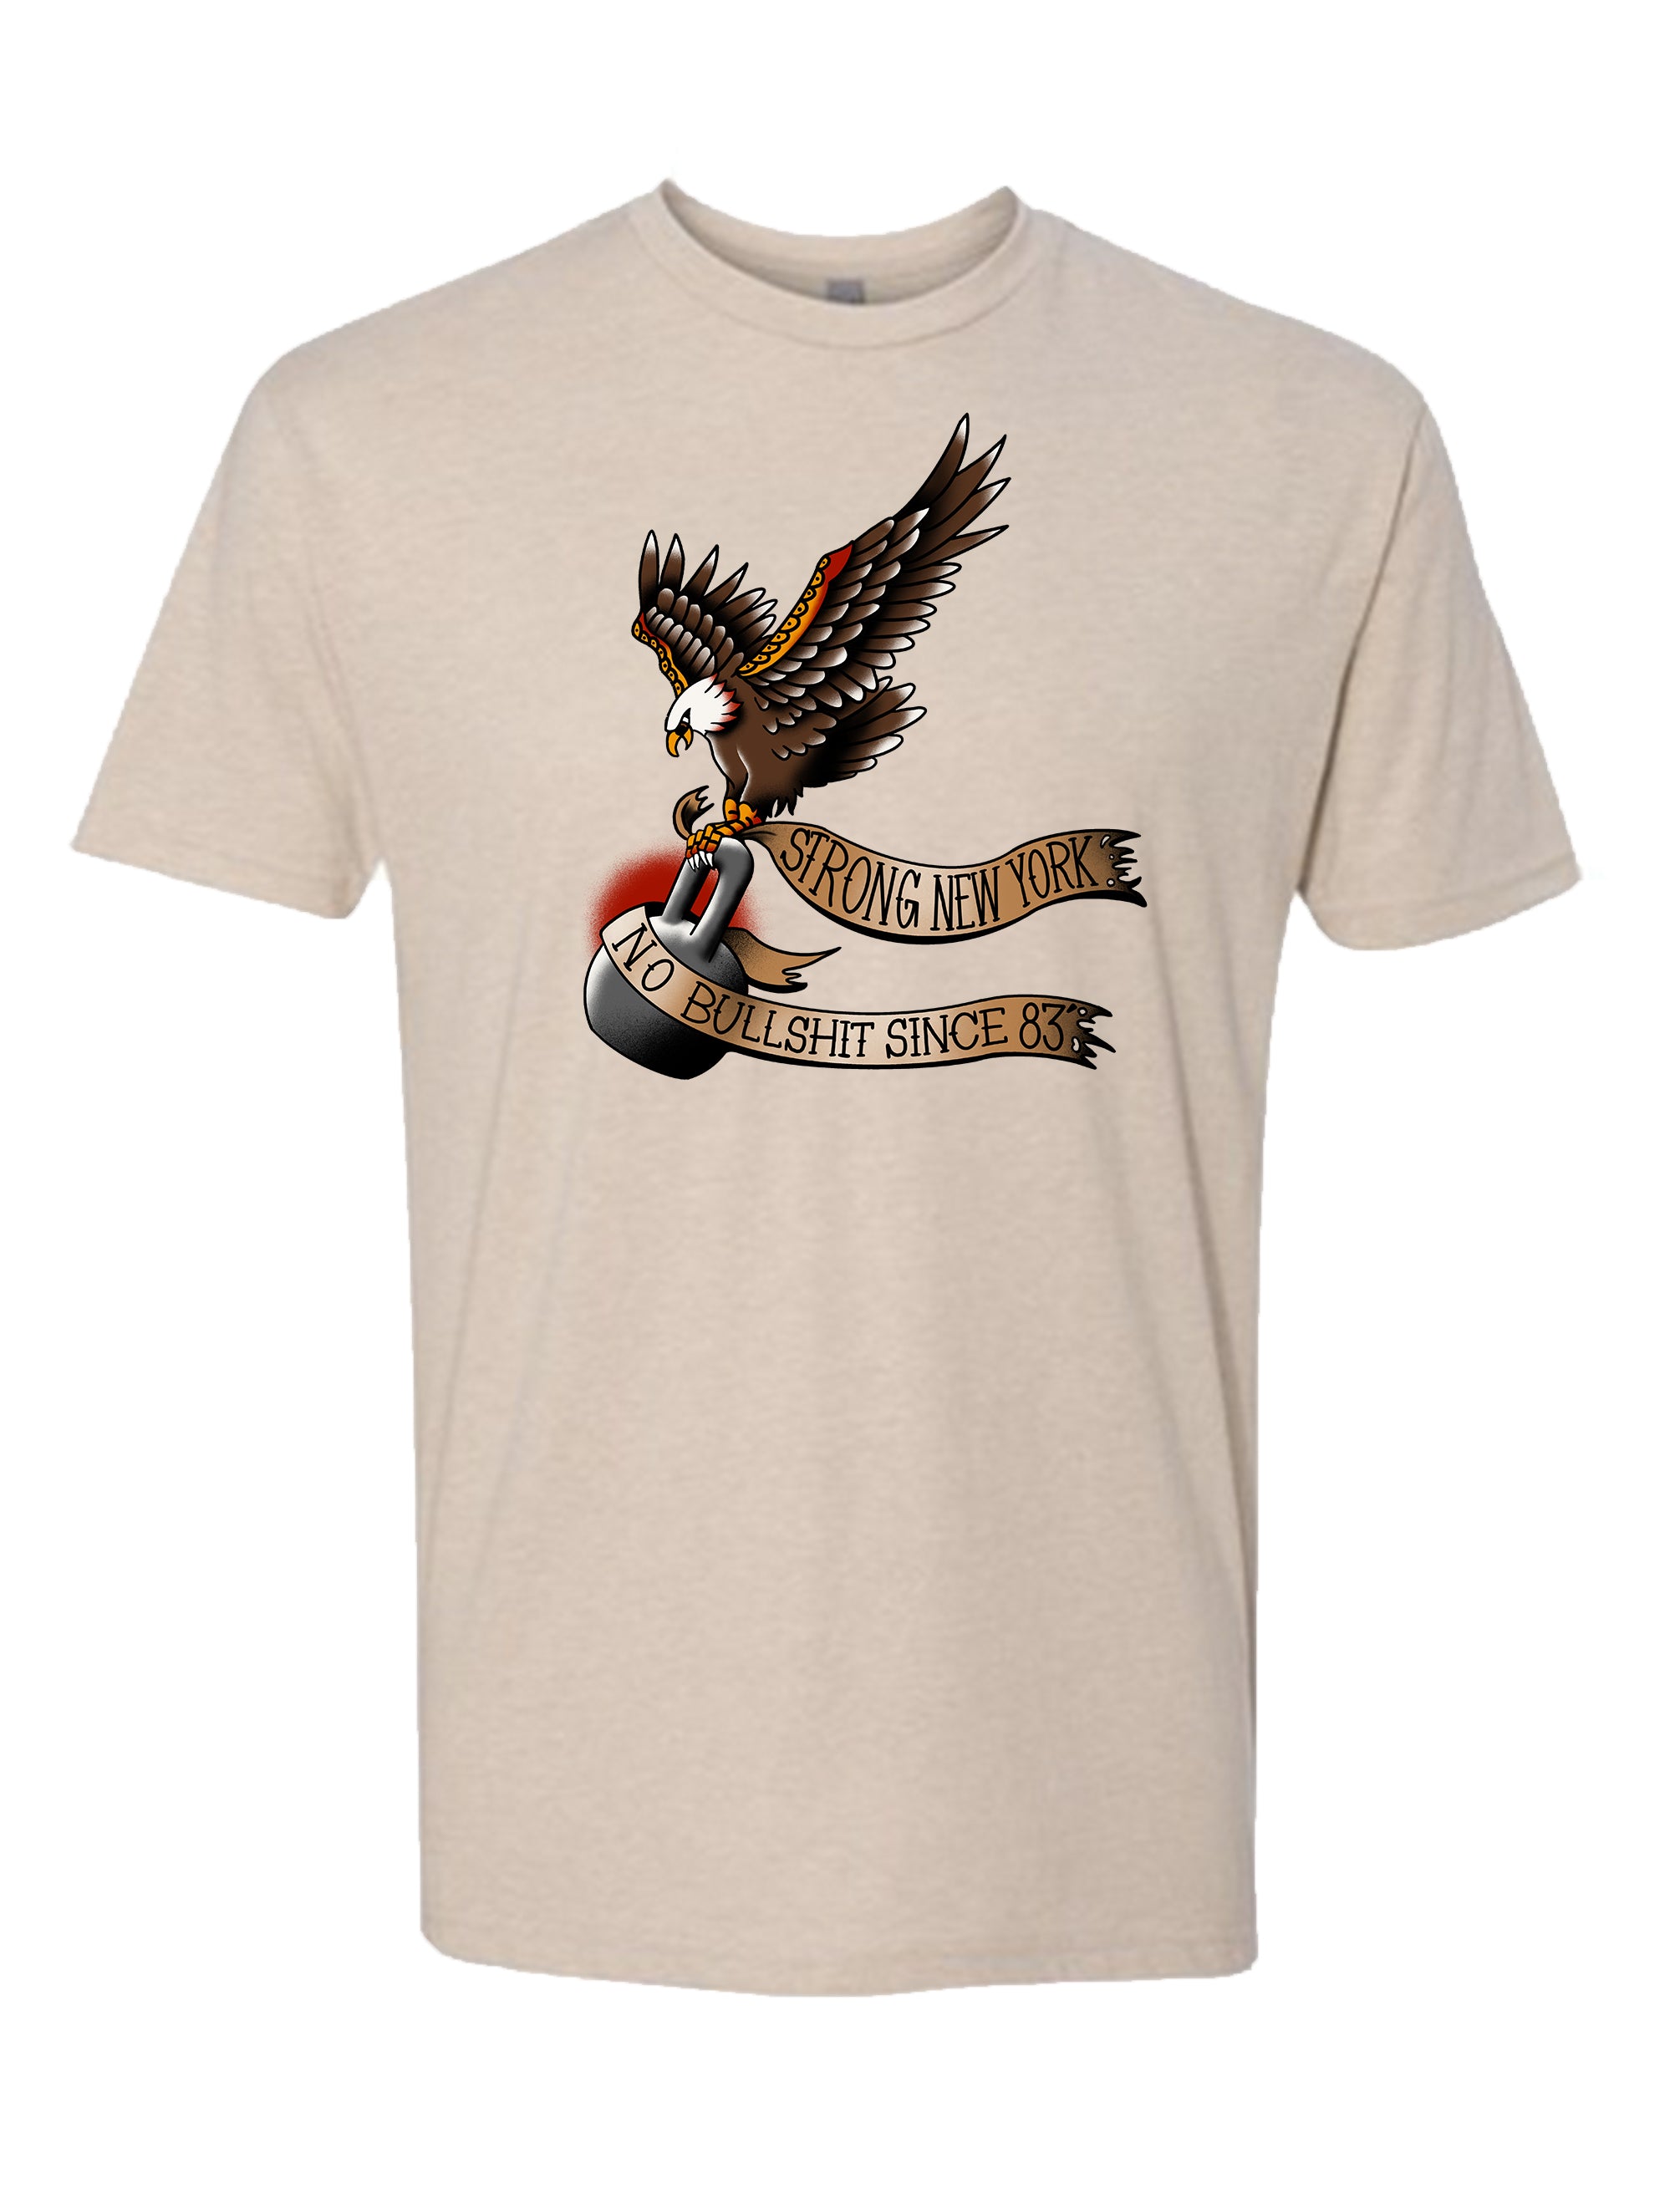 Born to Be Free Eagle T-Shirt